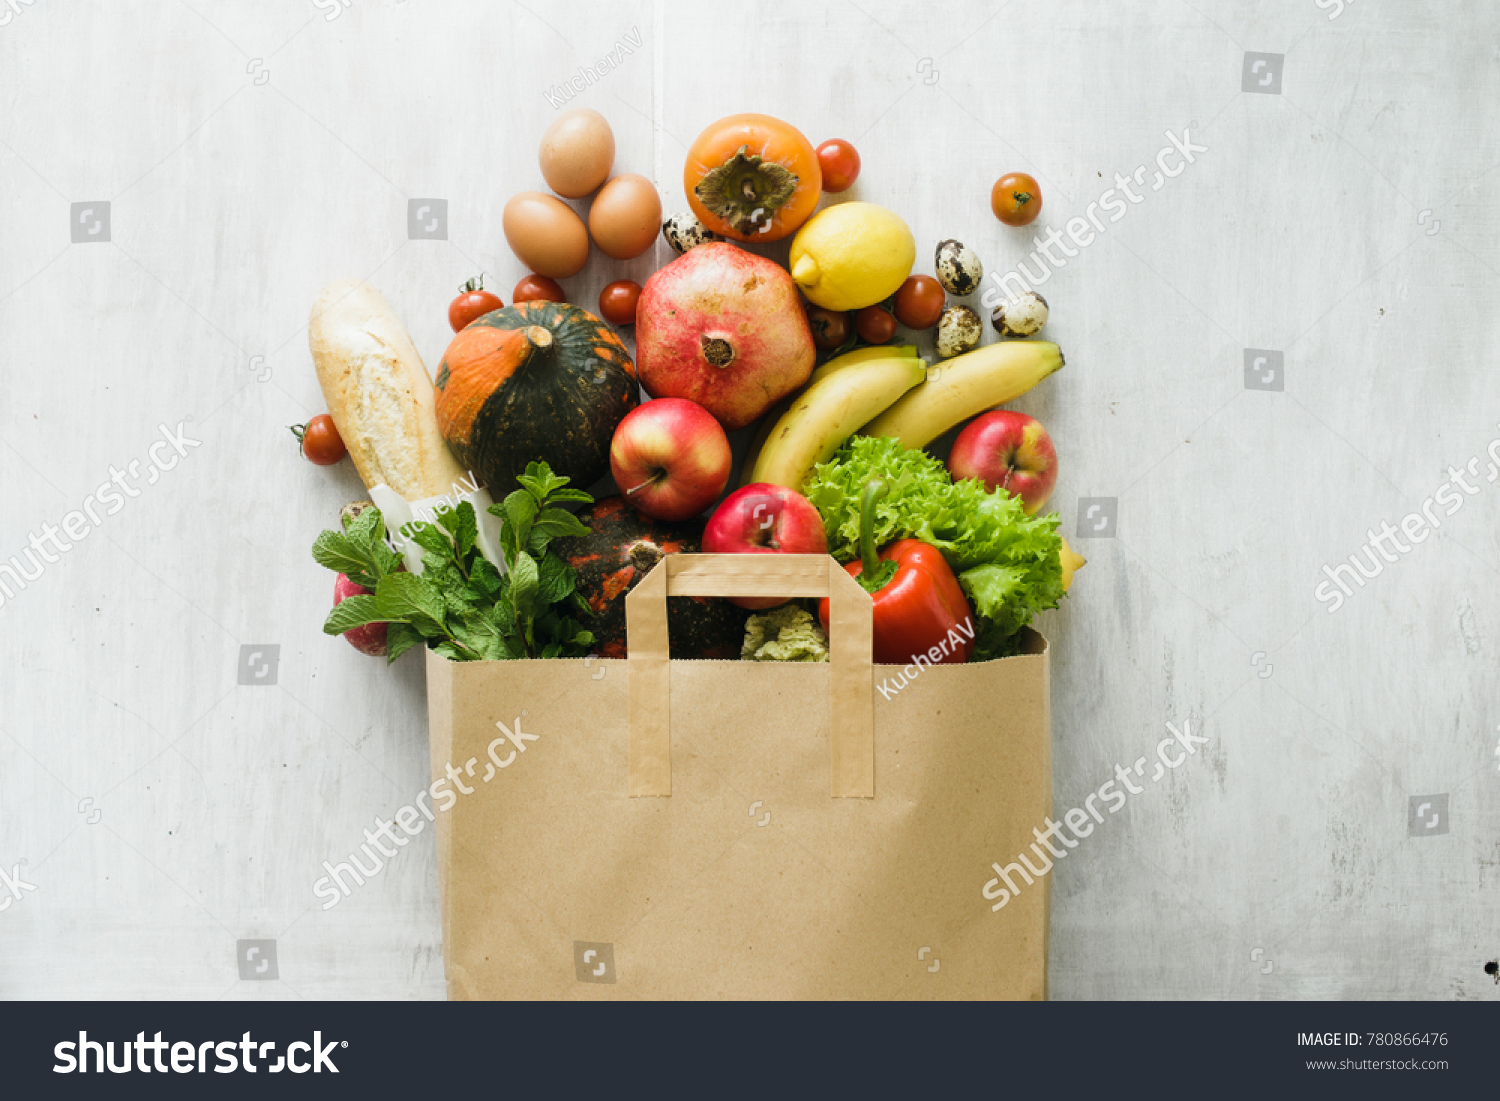 Paper bag of different health food on white wooden background. Top view. Flat lay #780866476